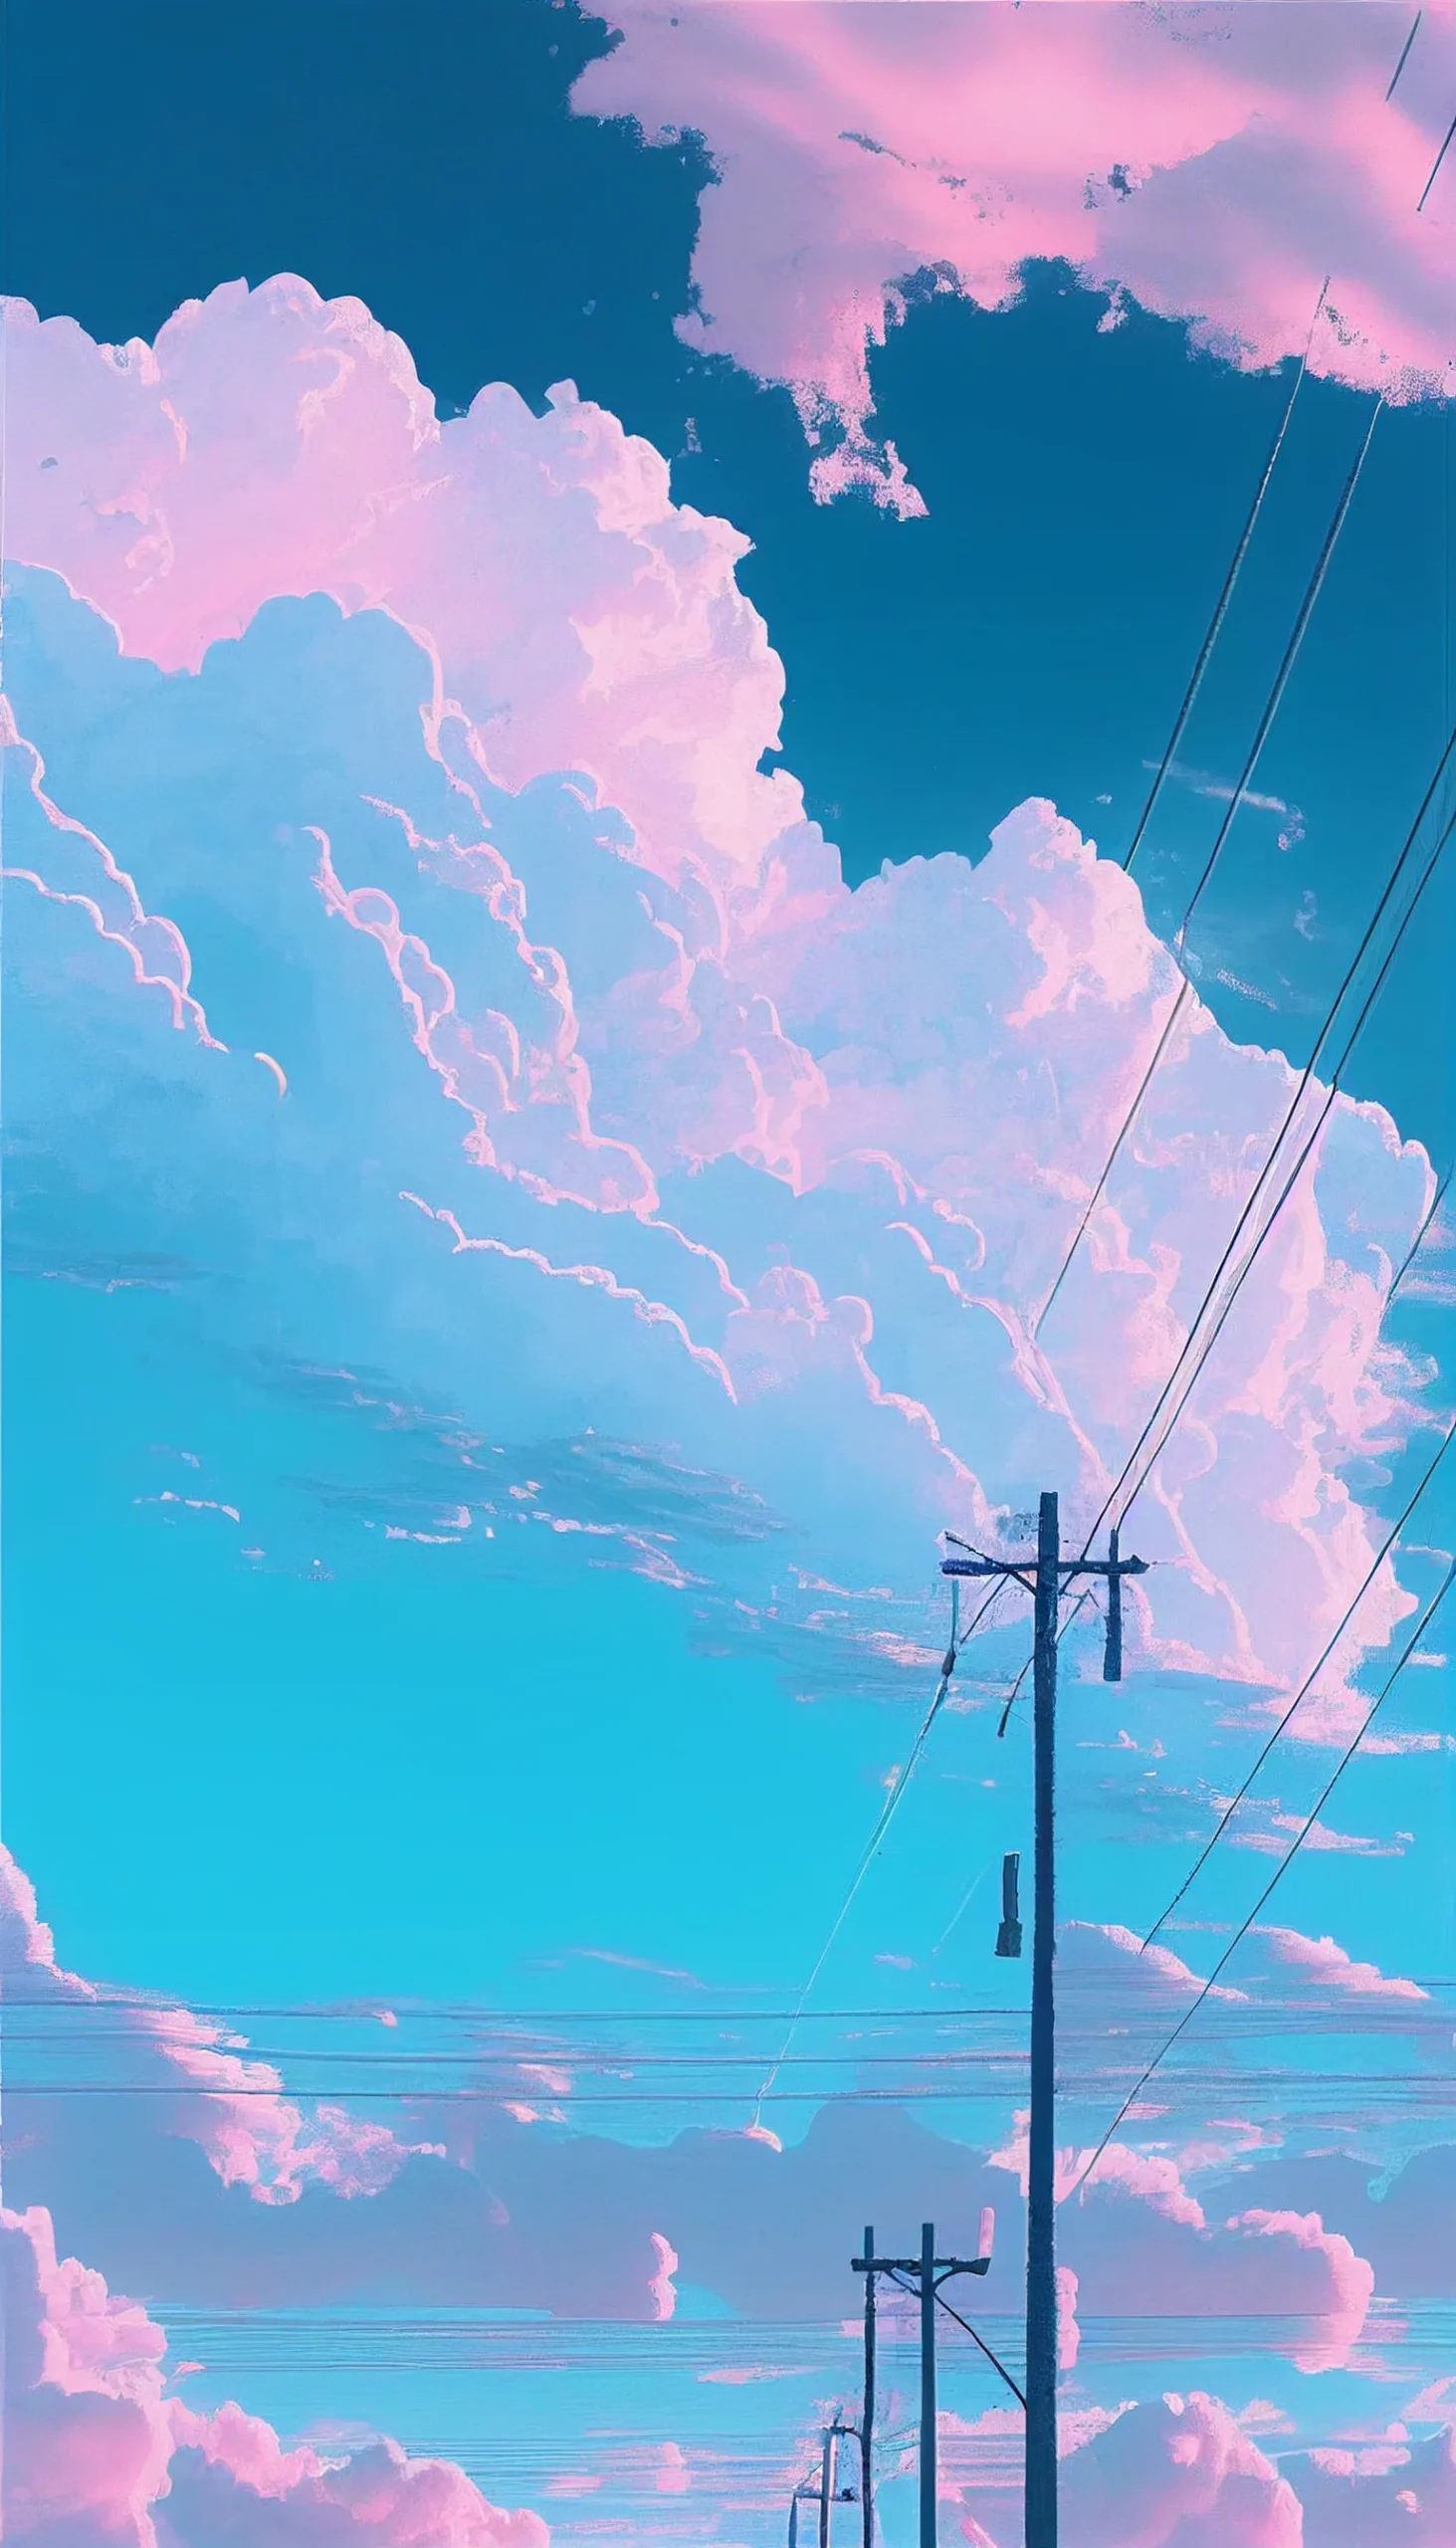 Stunning Pastel Aesthetic iPhone Wallpaper to Soothe Your Senses